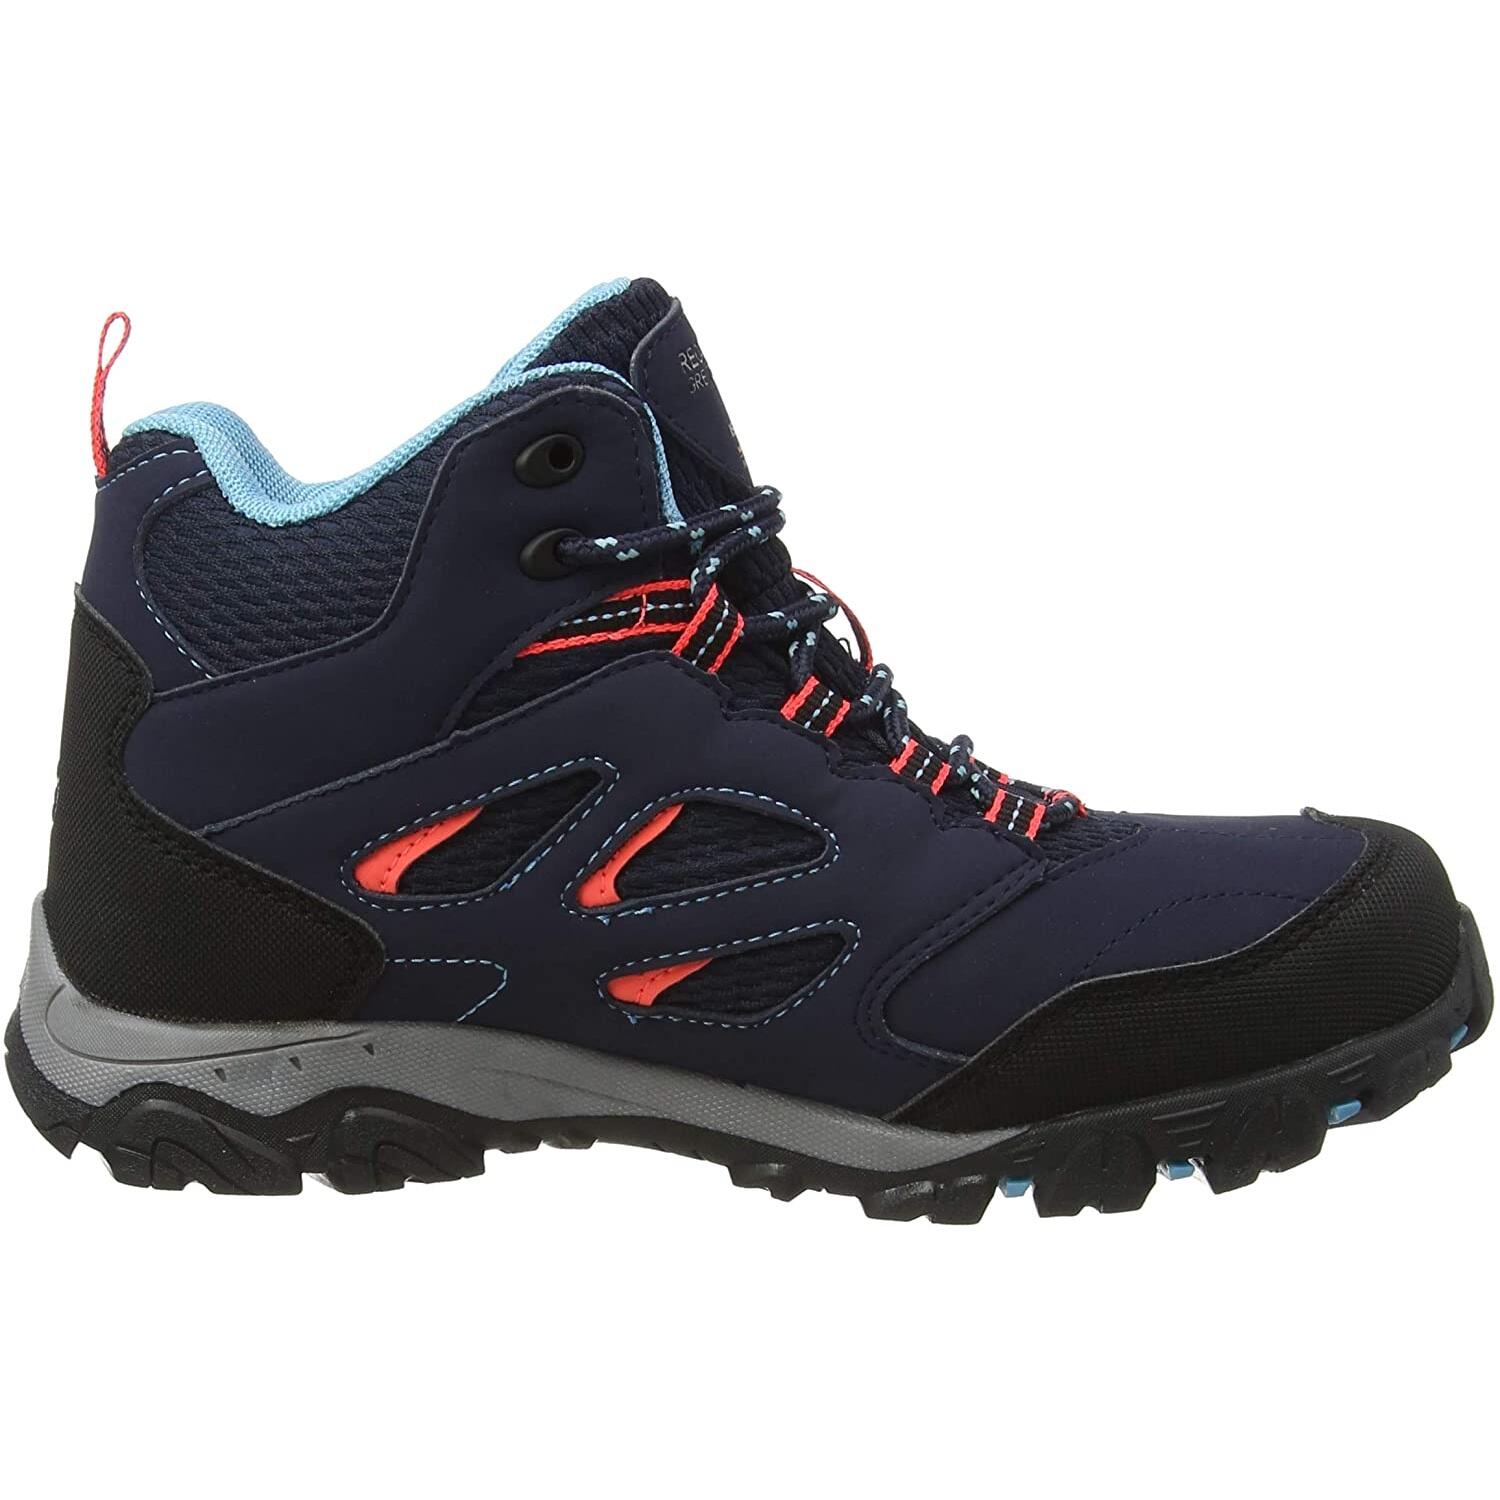 Childrens/Kids Holcombe IEP Junior Hiking Boots (Navy/Fiery Coral) 2/4